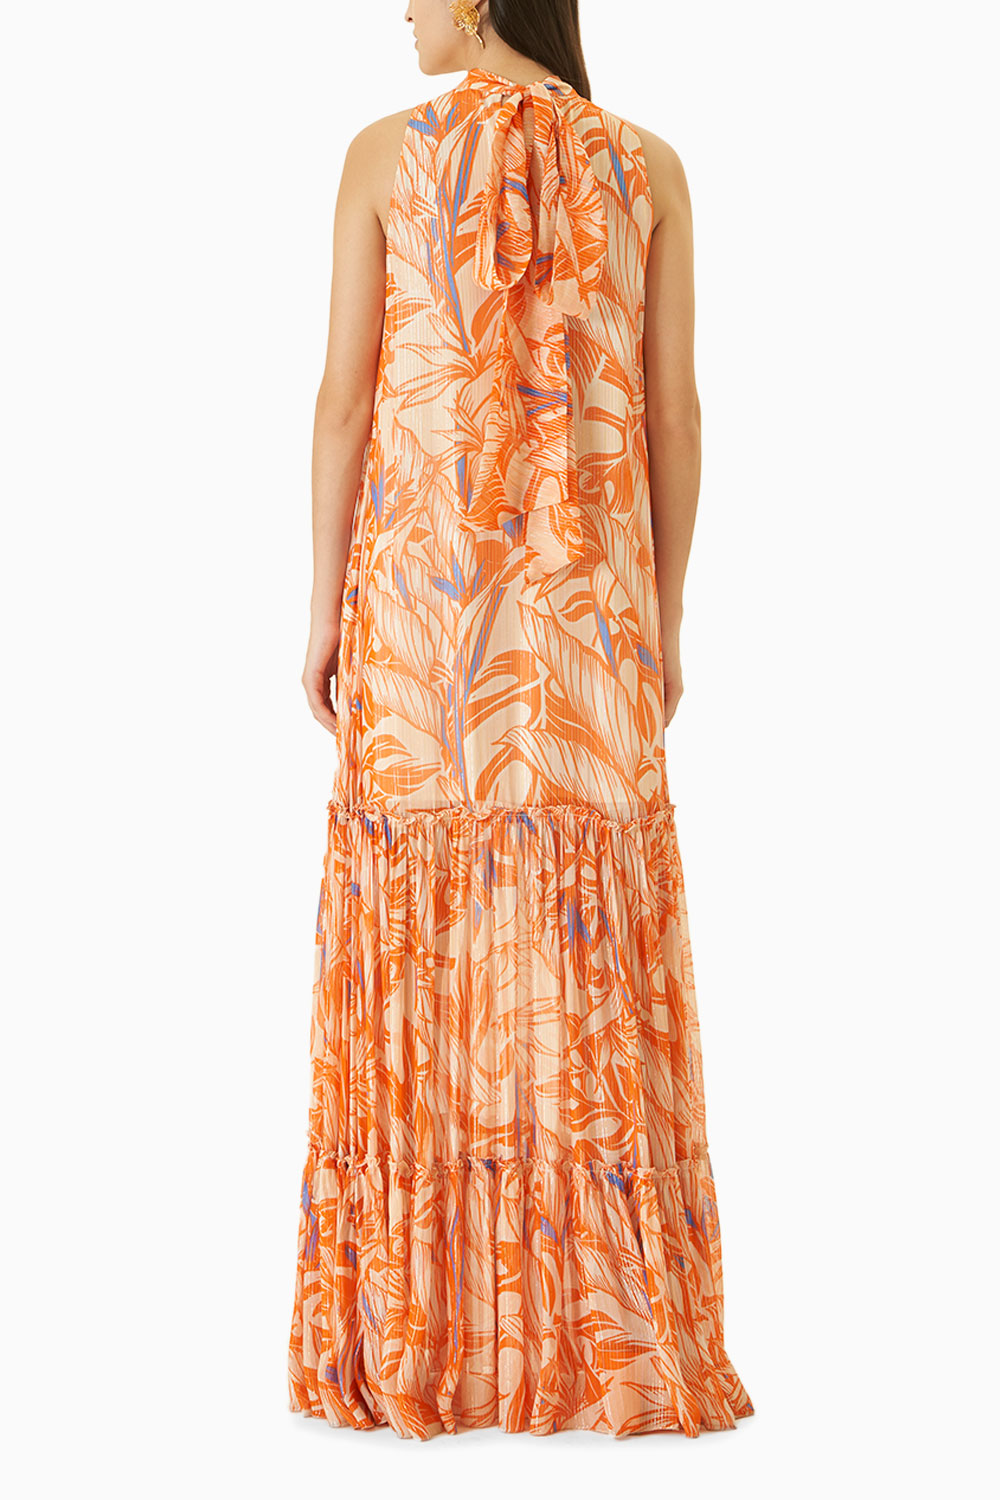 Willow Printed Tiered Tie-Neck Dress